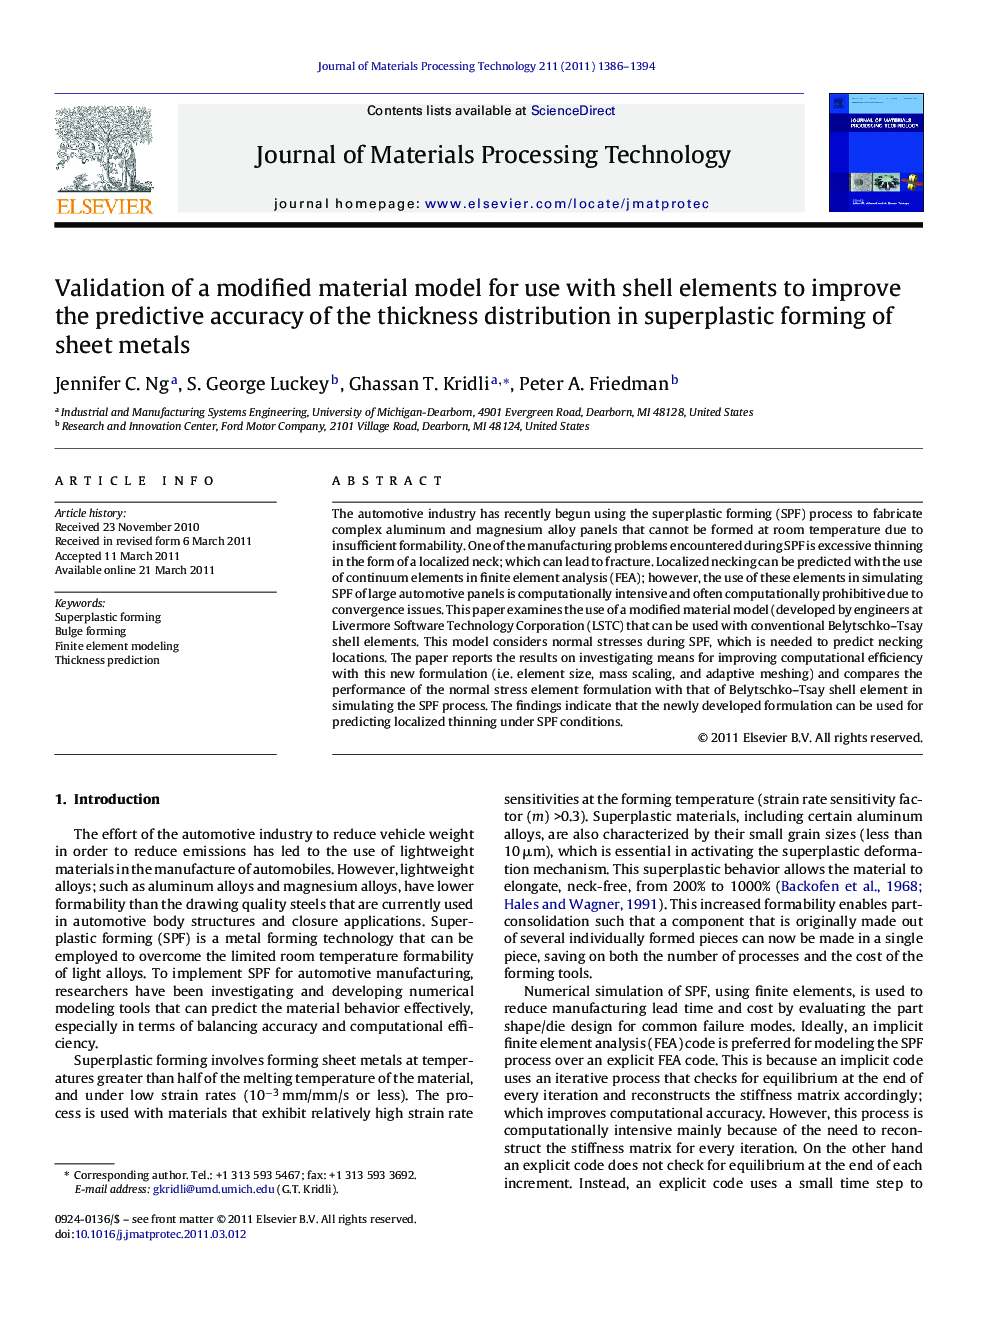 Validation of a modified material model for use with shell elements to improve the predictive accuracy of the thickness distribution in superplastic forming of sheet metals